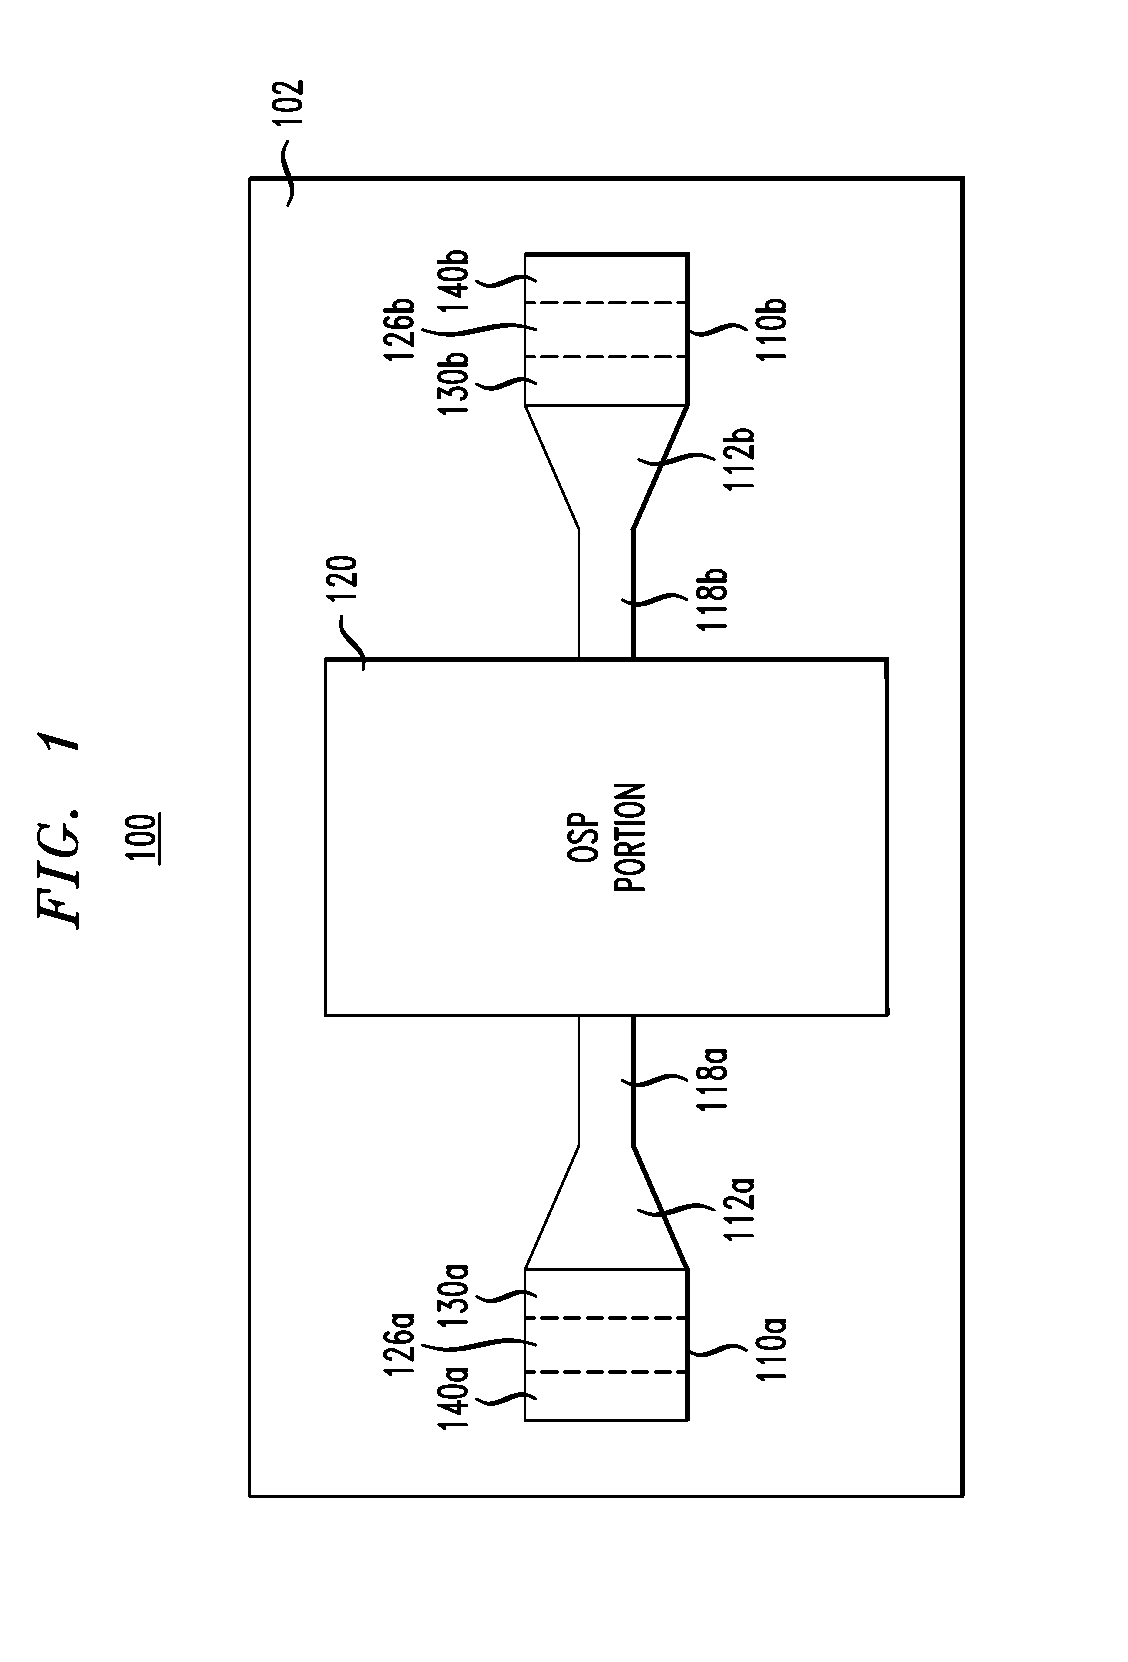 Photonic integrated circuit having a waveguide-grating coupler